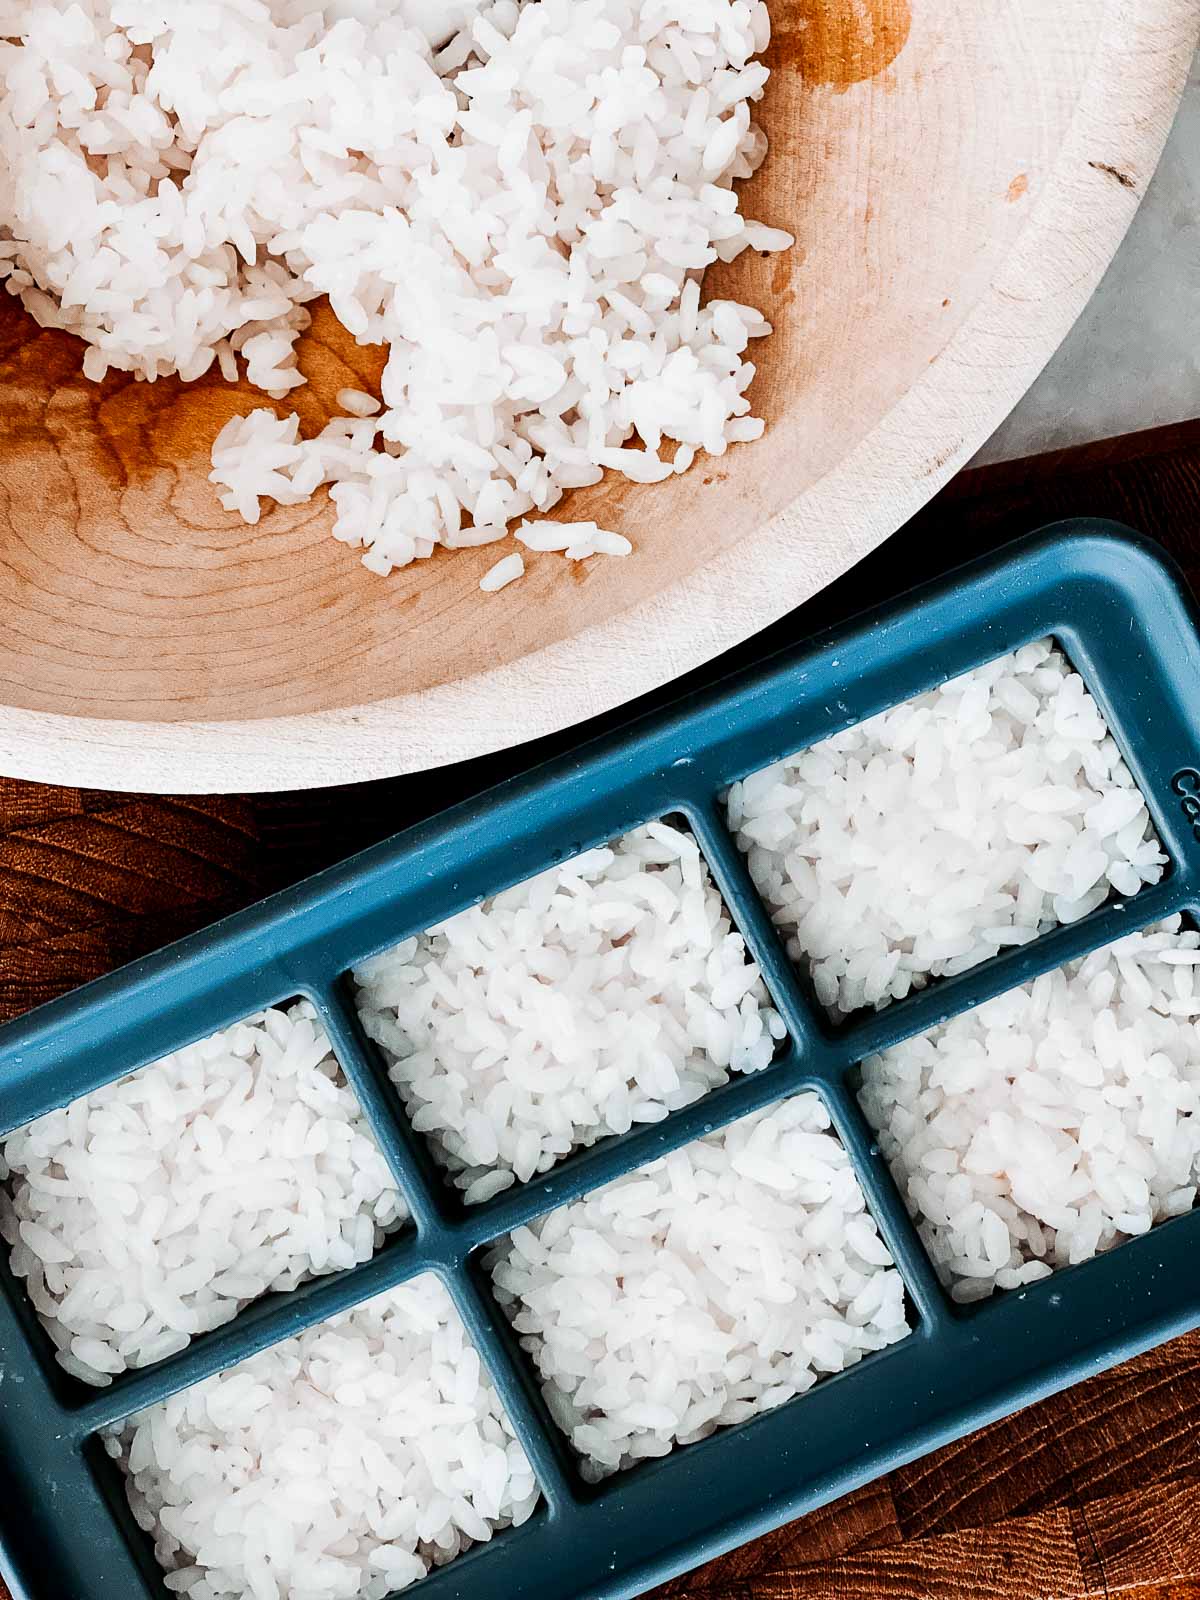 A black silicone ice cube tray filled with sushi rice and a wooden bowl of rice on the side.